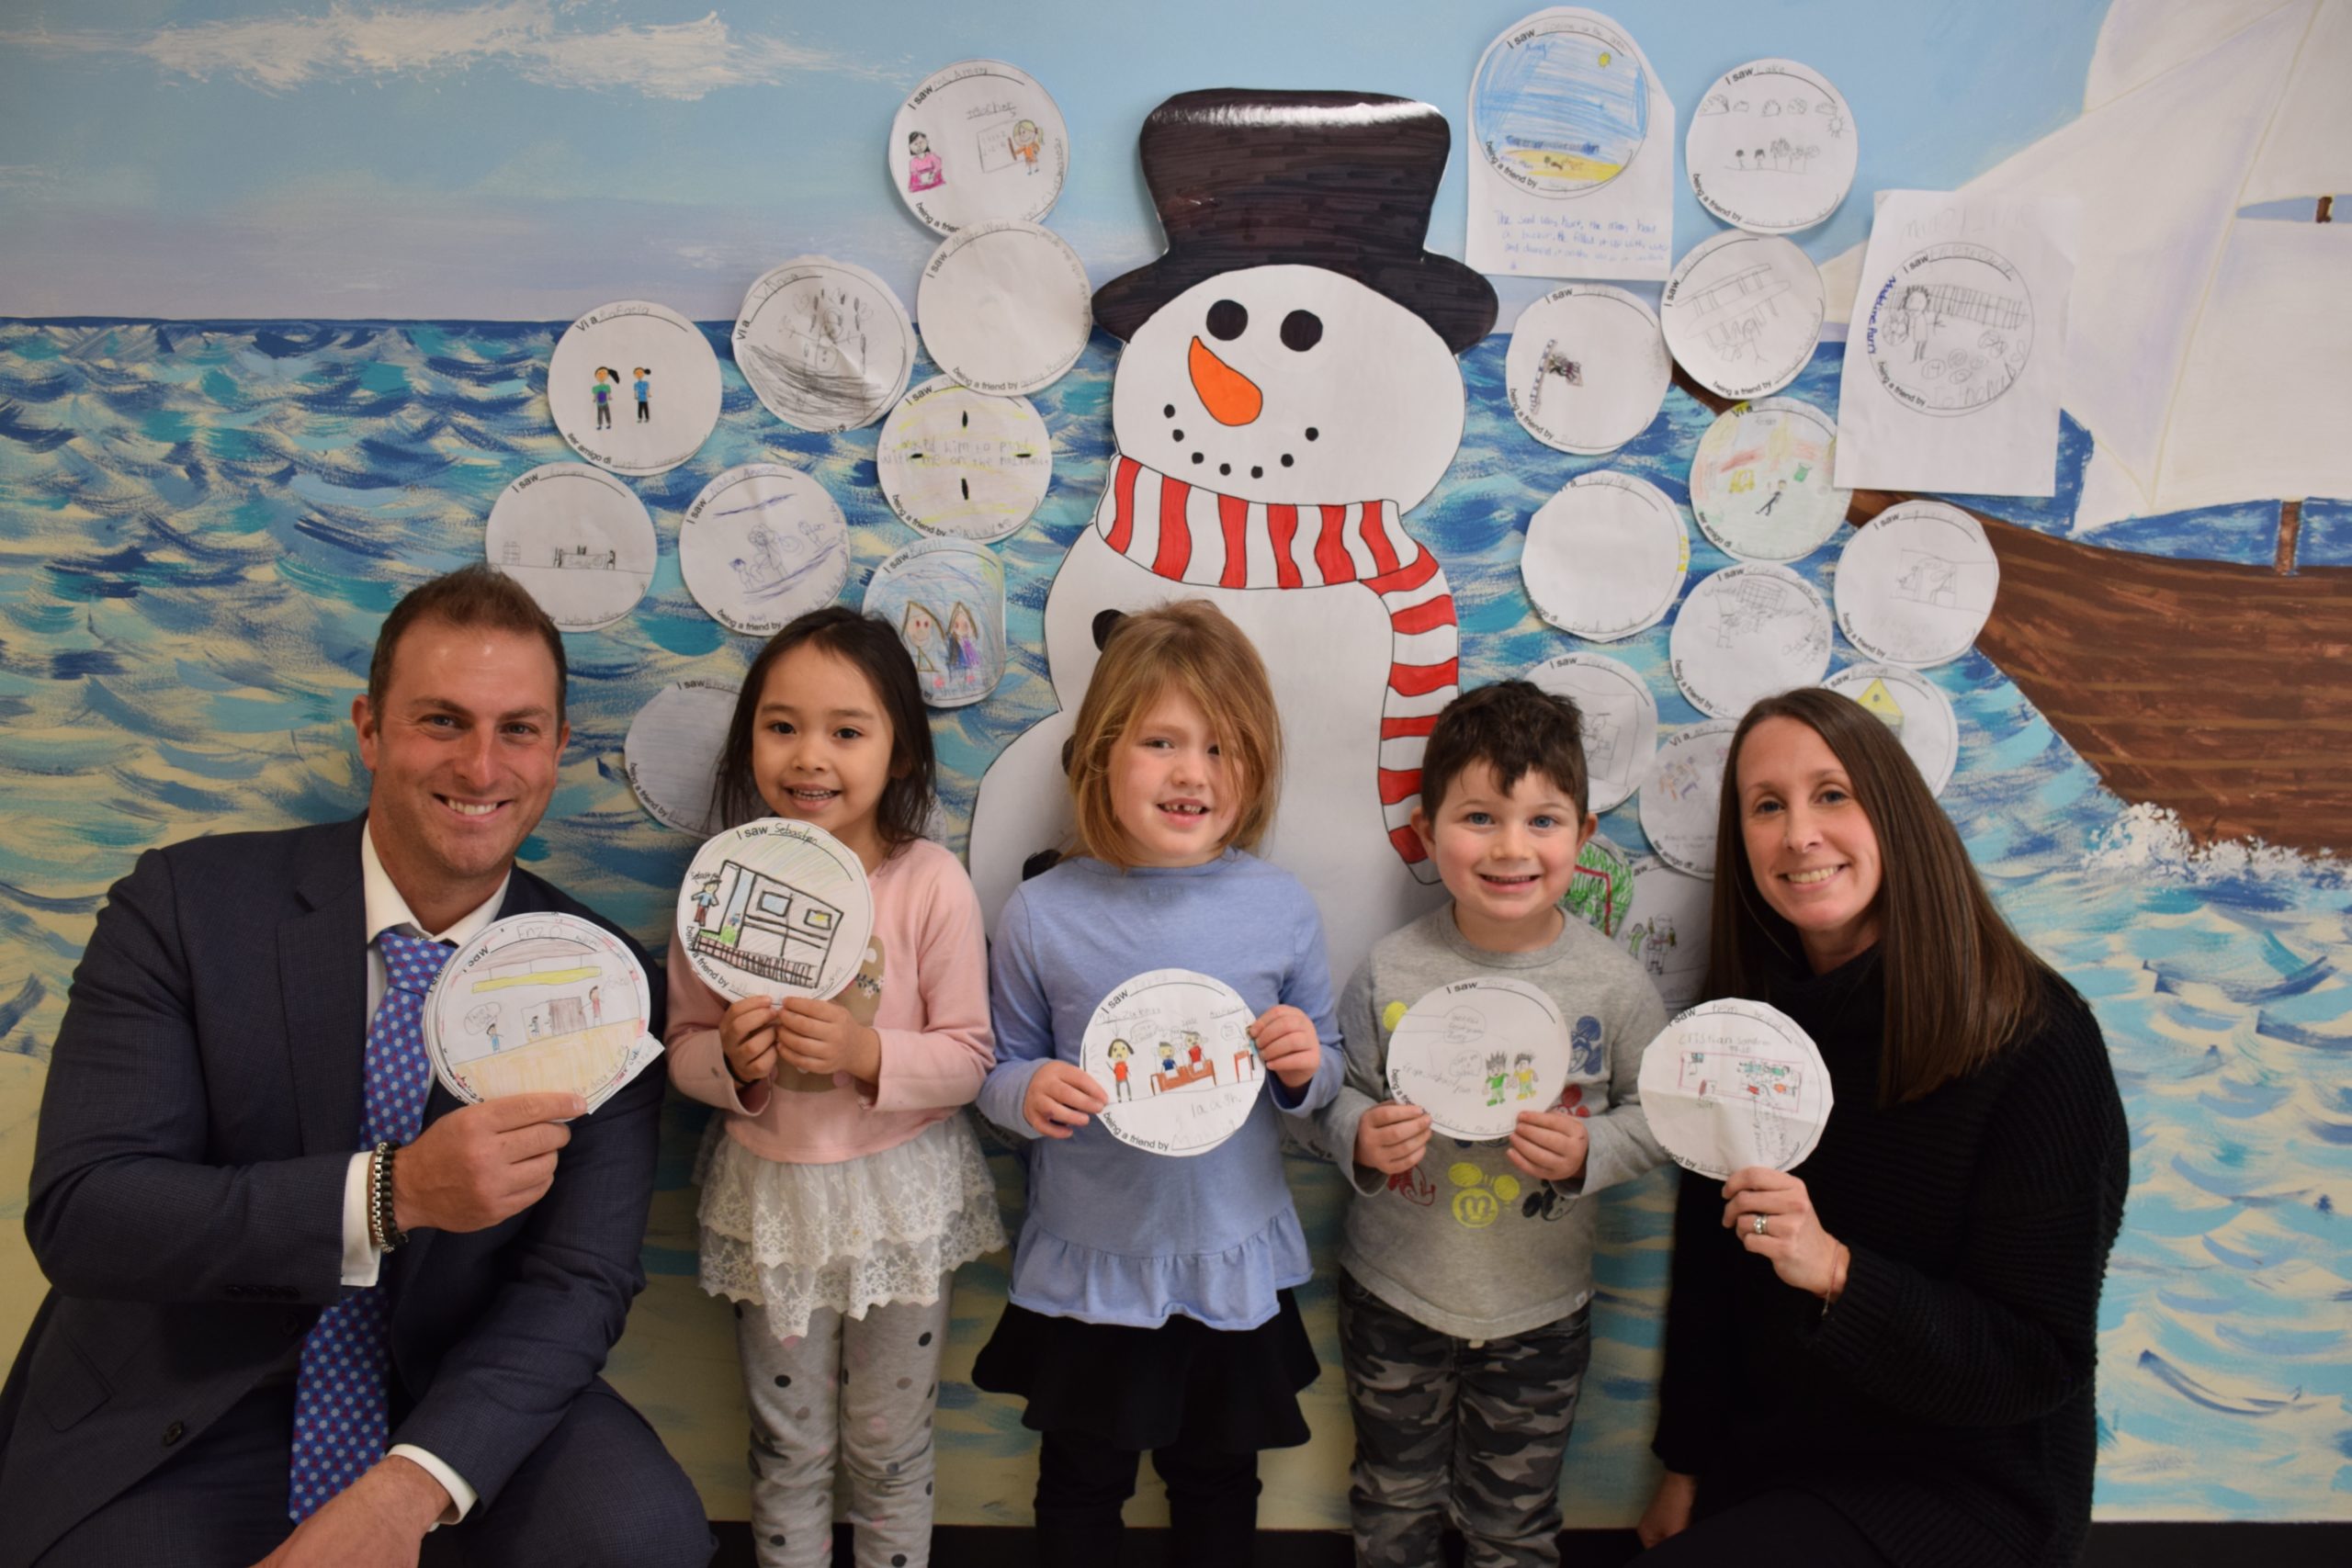 Southampton Elementary School students posed with Sammy the Snowman, the centerpiece of a friendship initiative at the school. From left,Assistant Principal Jeremy Garritano, kindergartners Katherine Choy, Eleanor McGowin and Jack Brody, and teacher Sara Drohan.